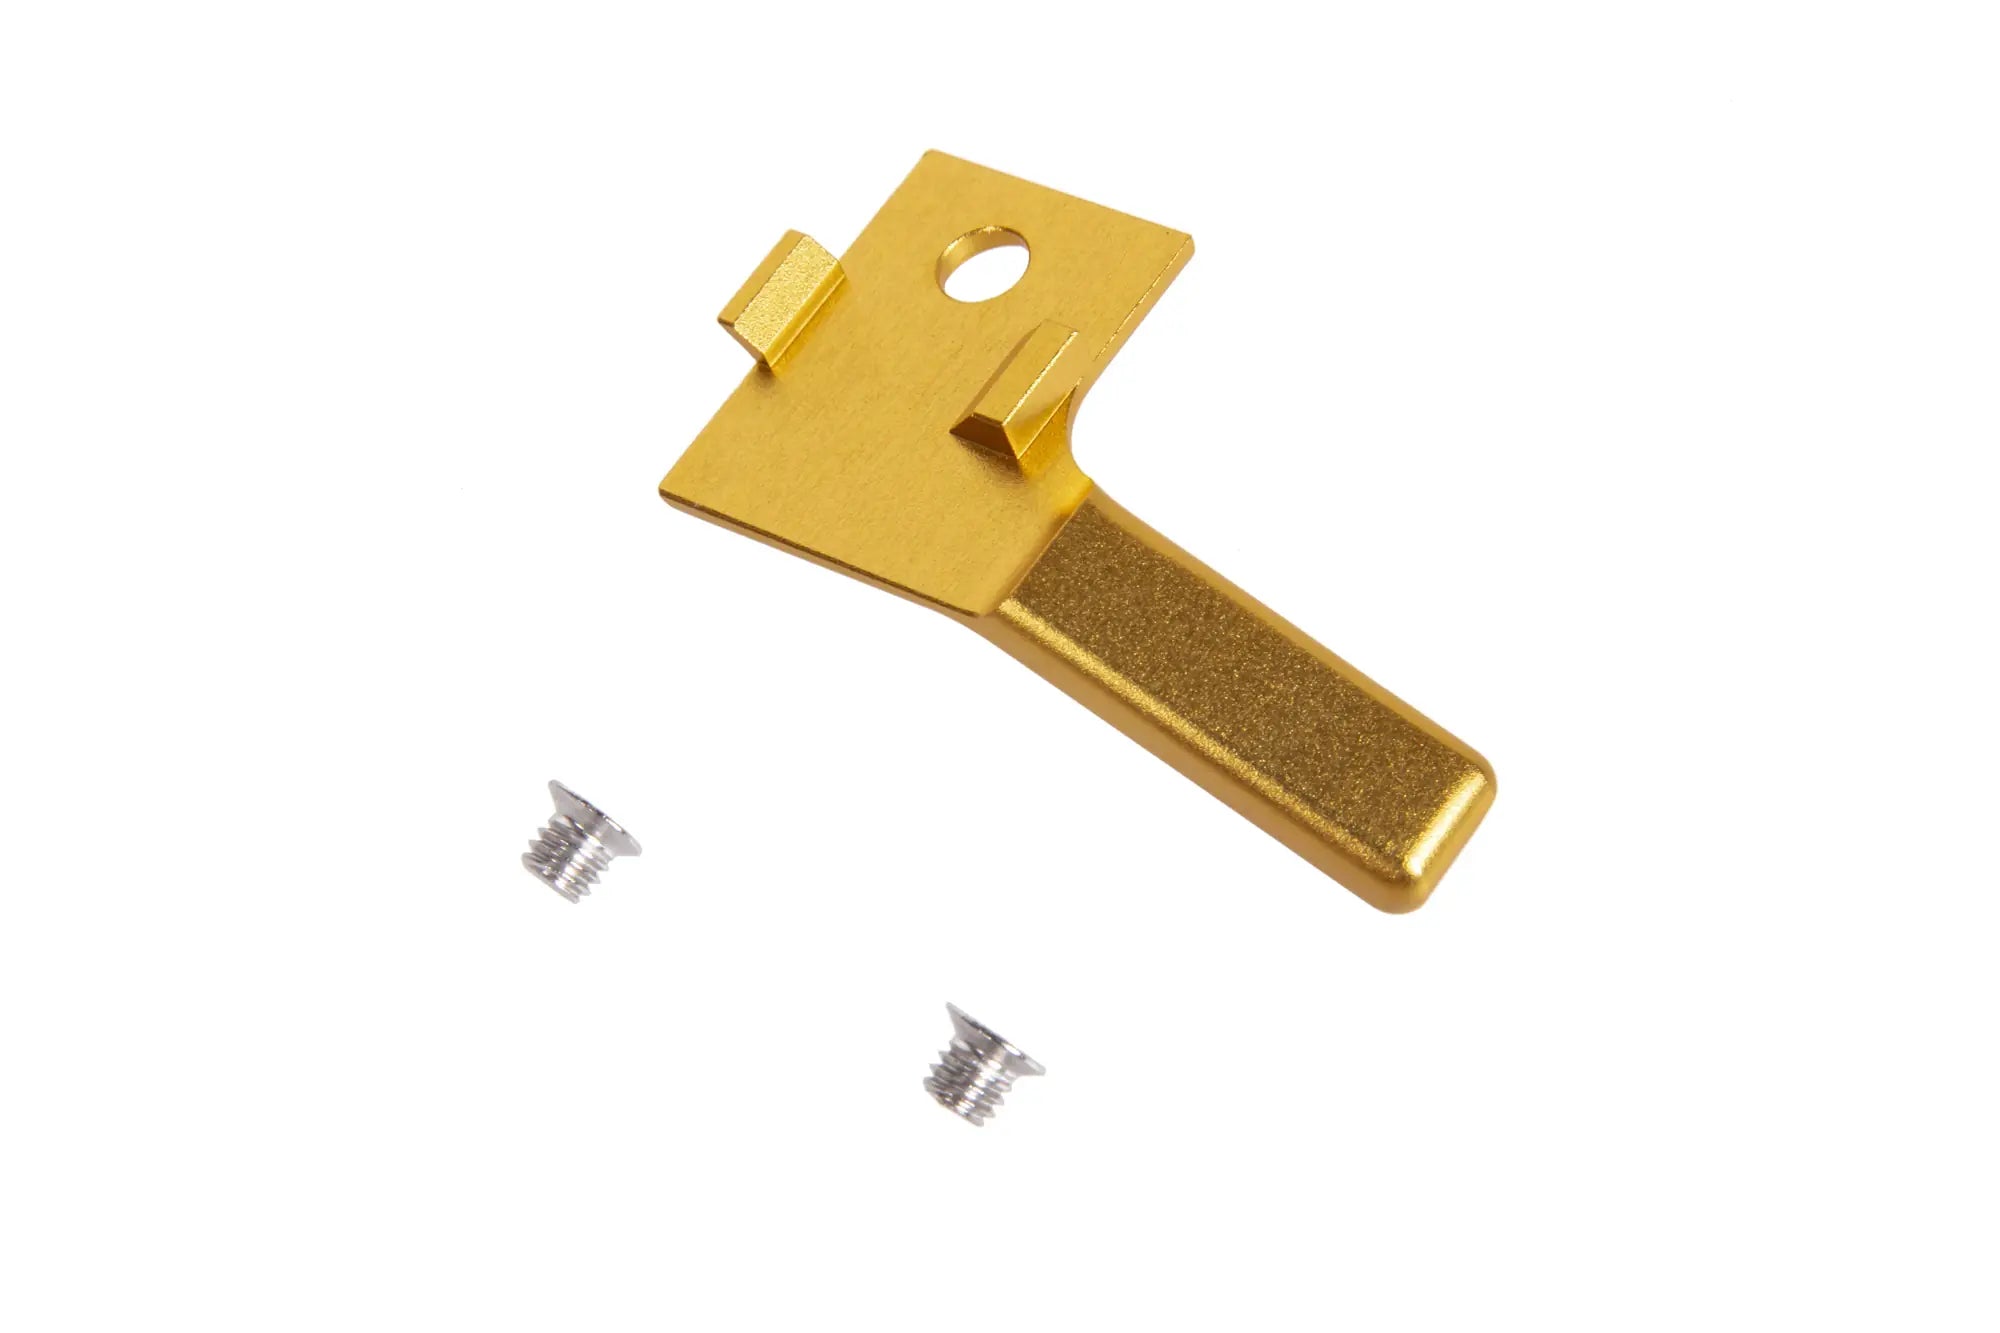 RAW ER reloading handle for Hi-Capa replicas (right) - Gold-1